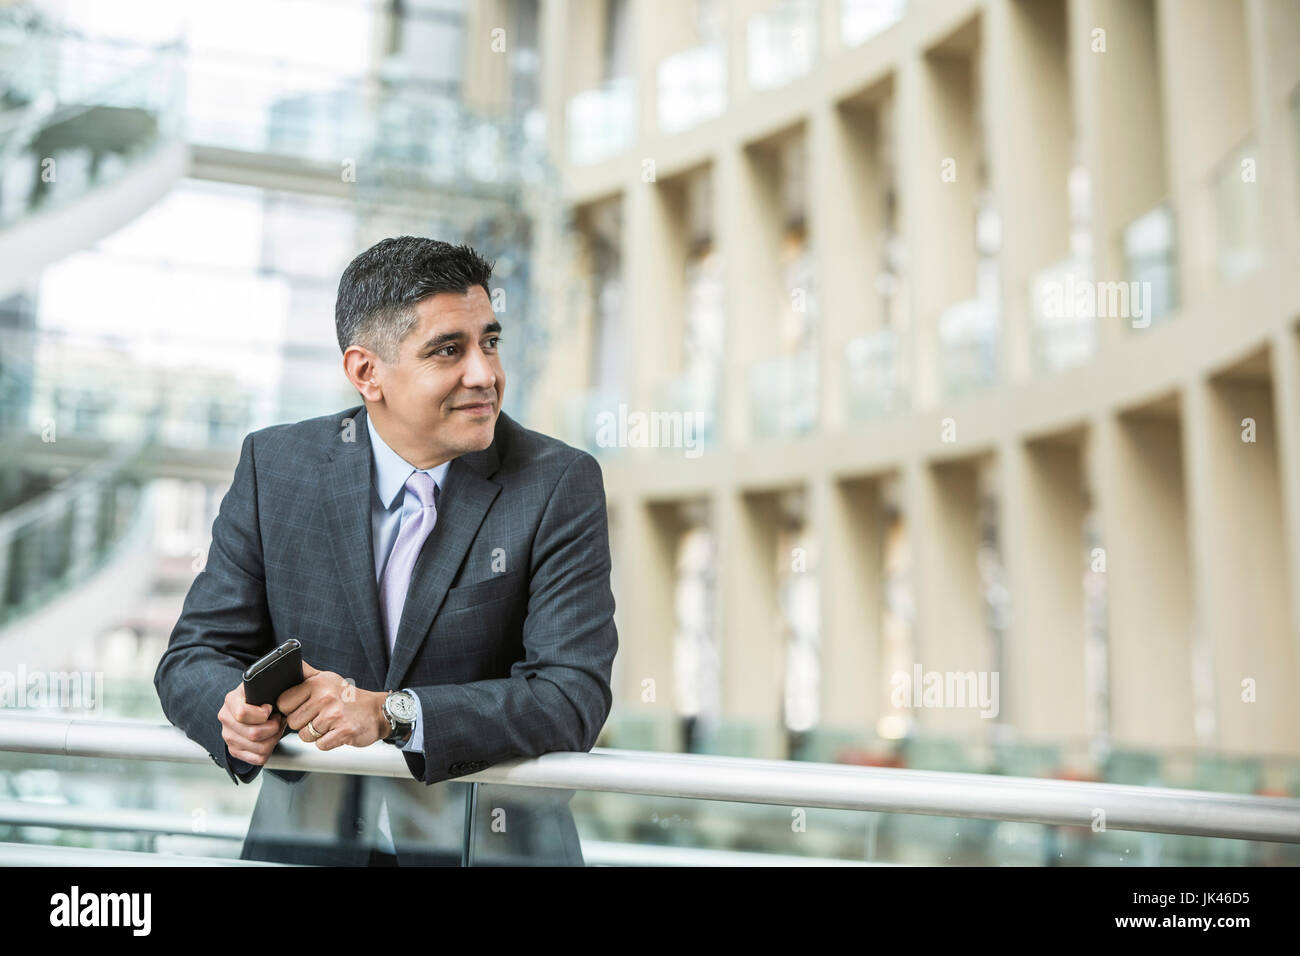 Mixed Race businessman leaning on railing in lobby holding cell phone Stock Photo